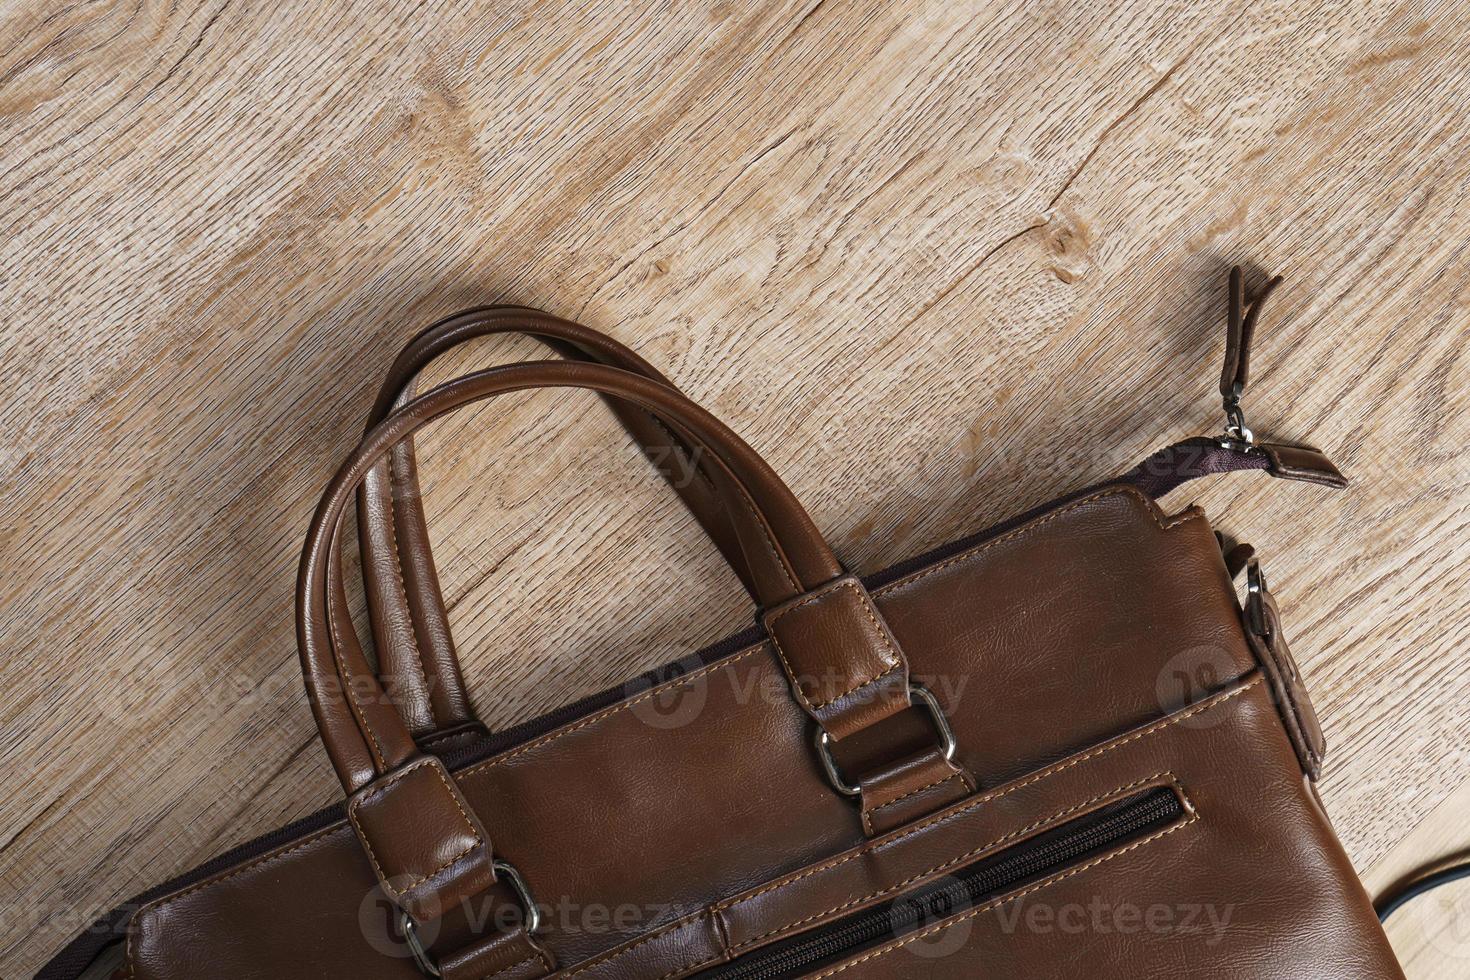 Leather bag on wooden board background photo